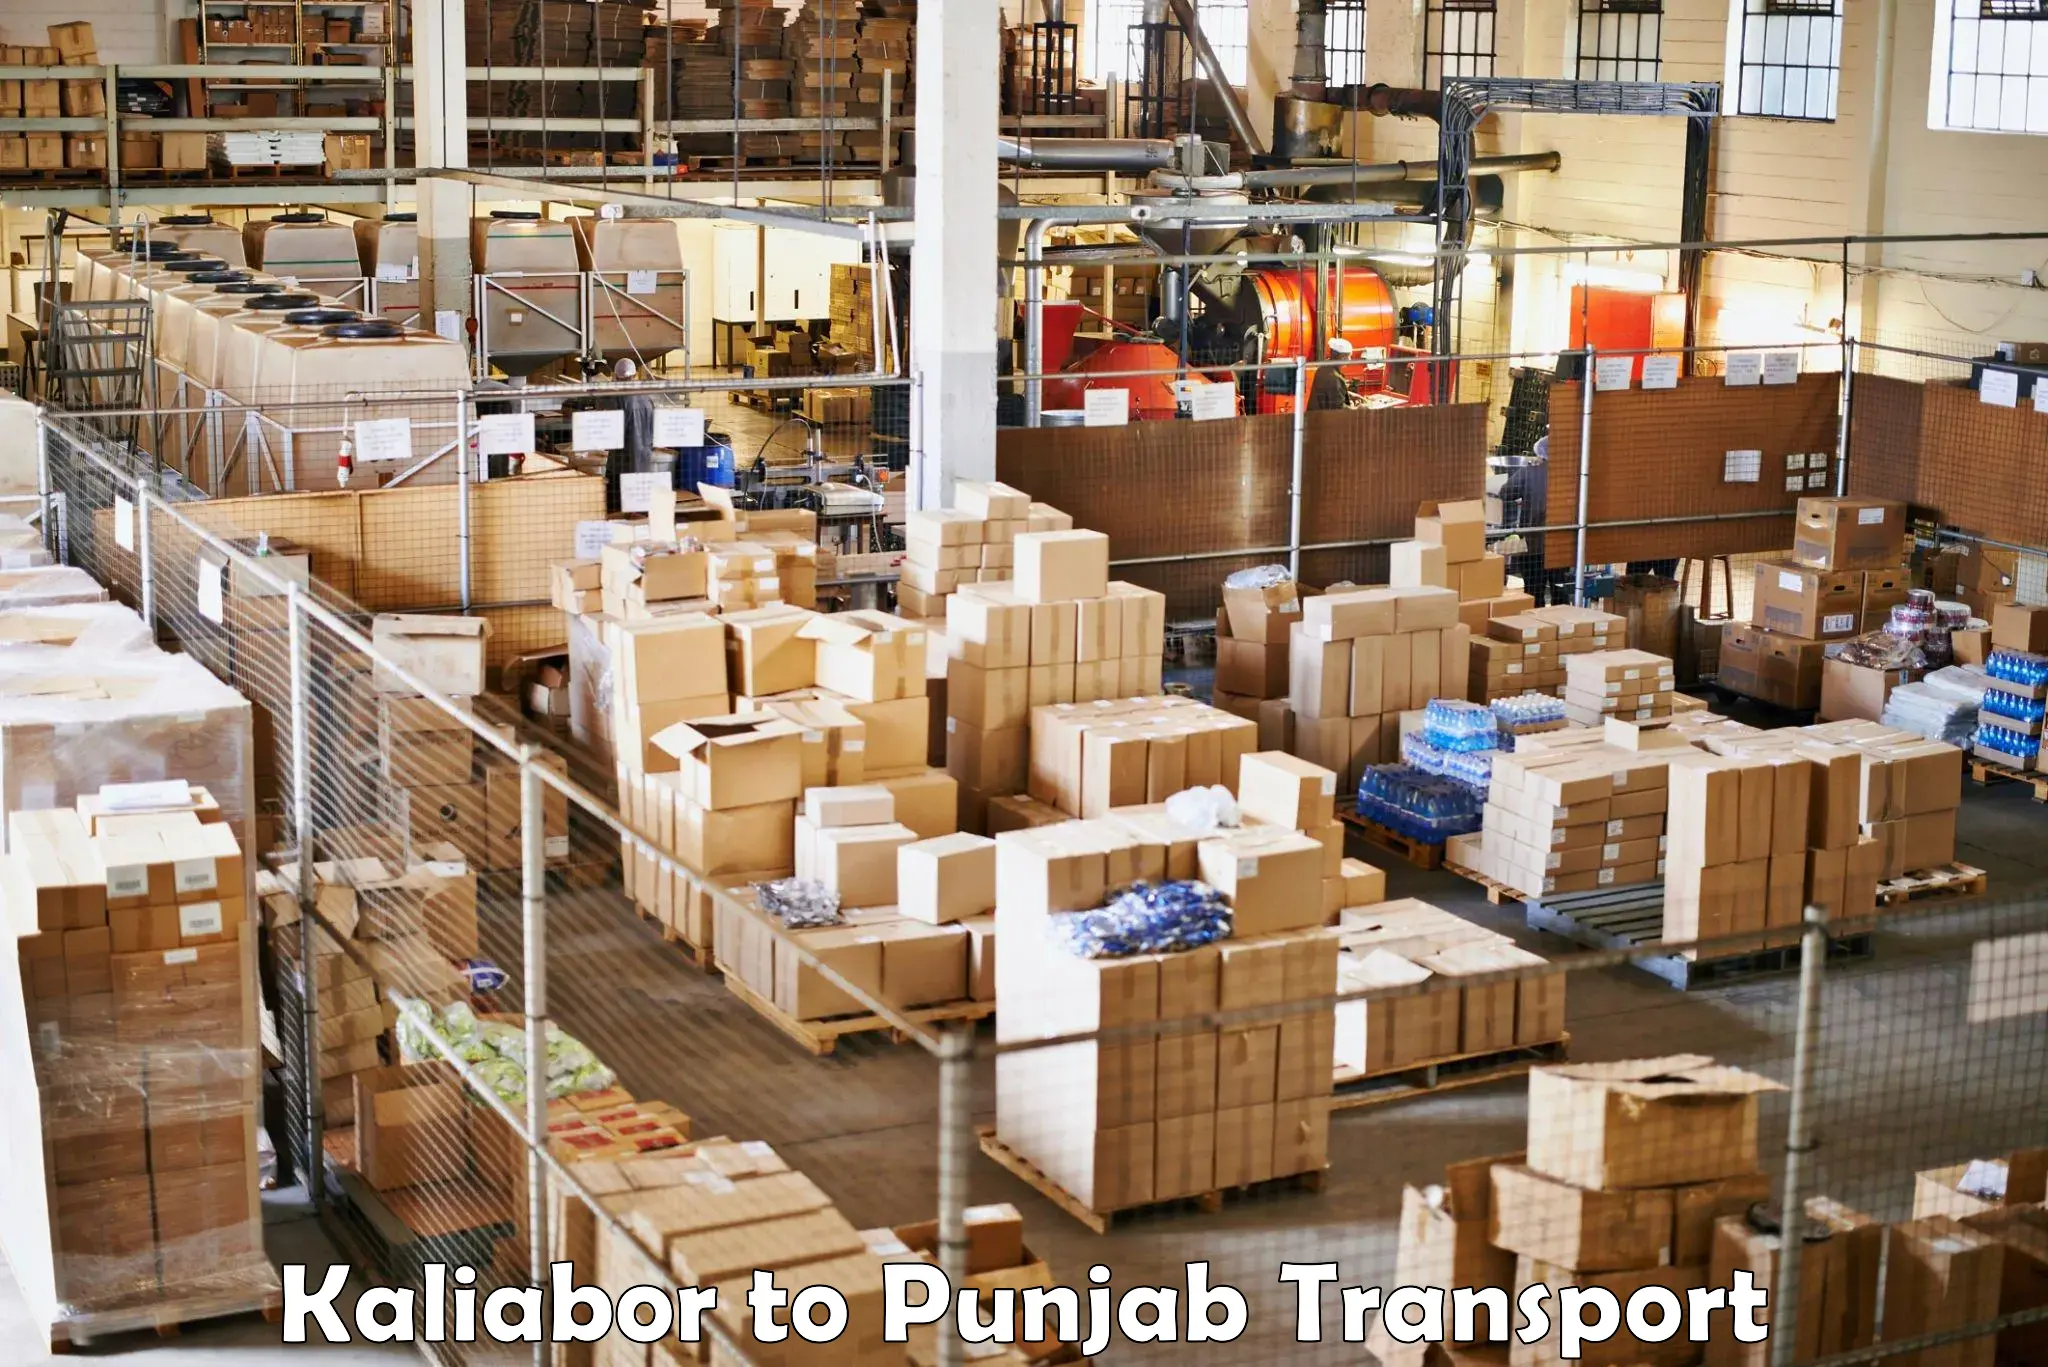 Domestic goods transportation services Kaliabor to Pathankot